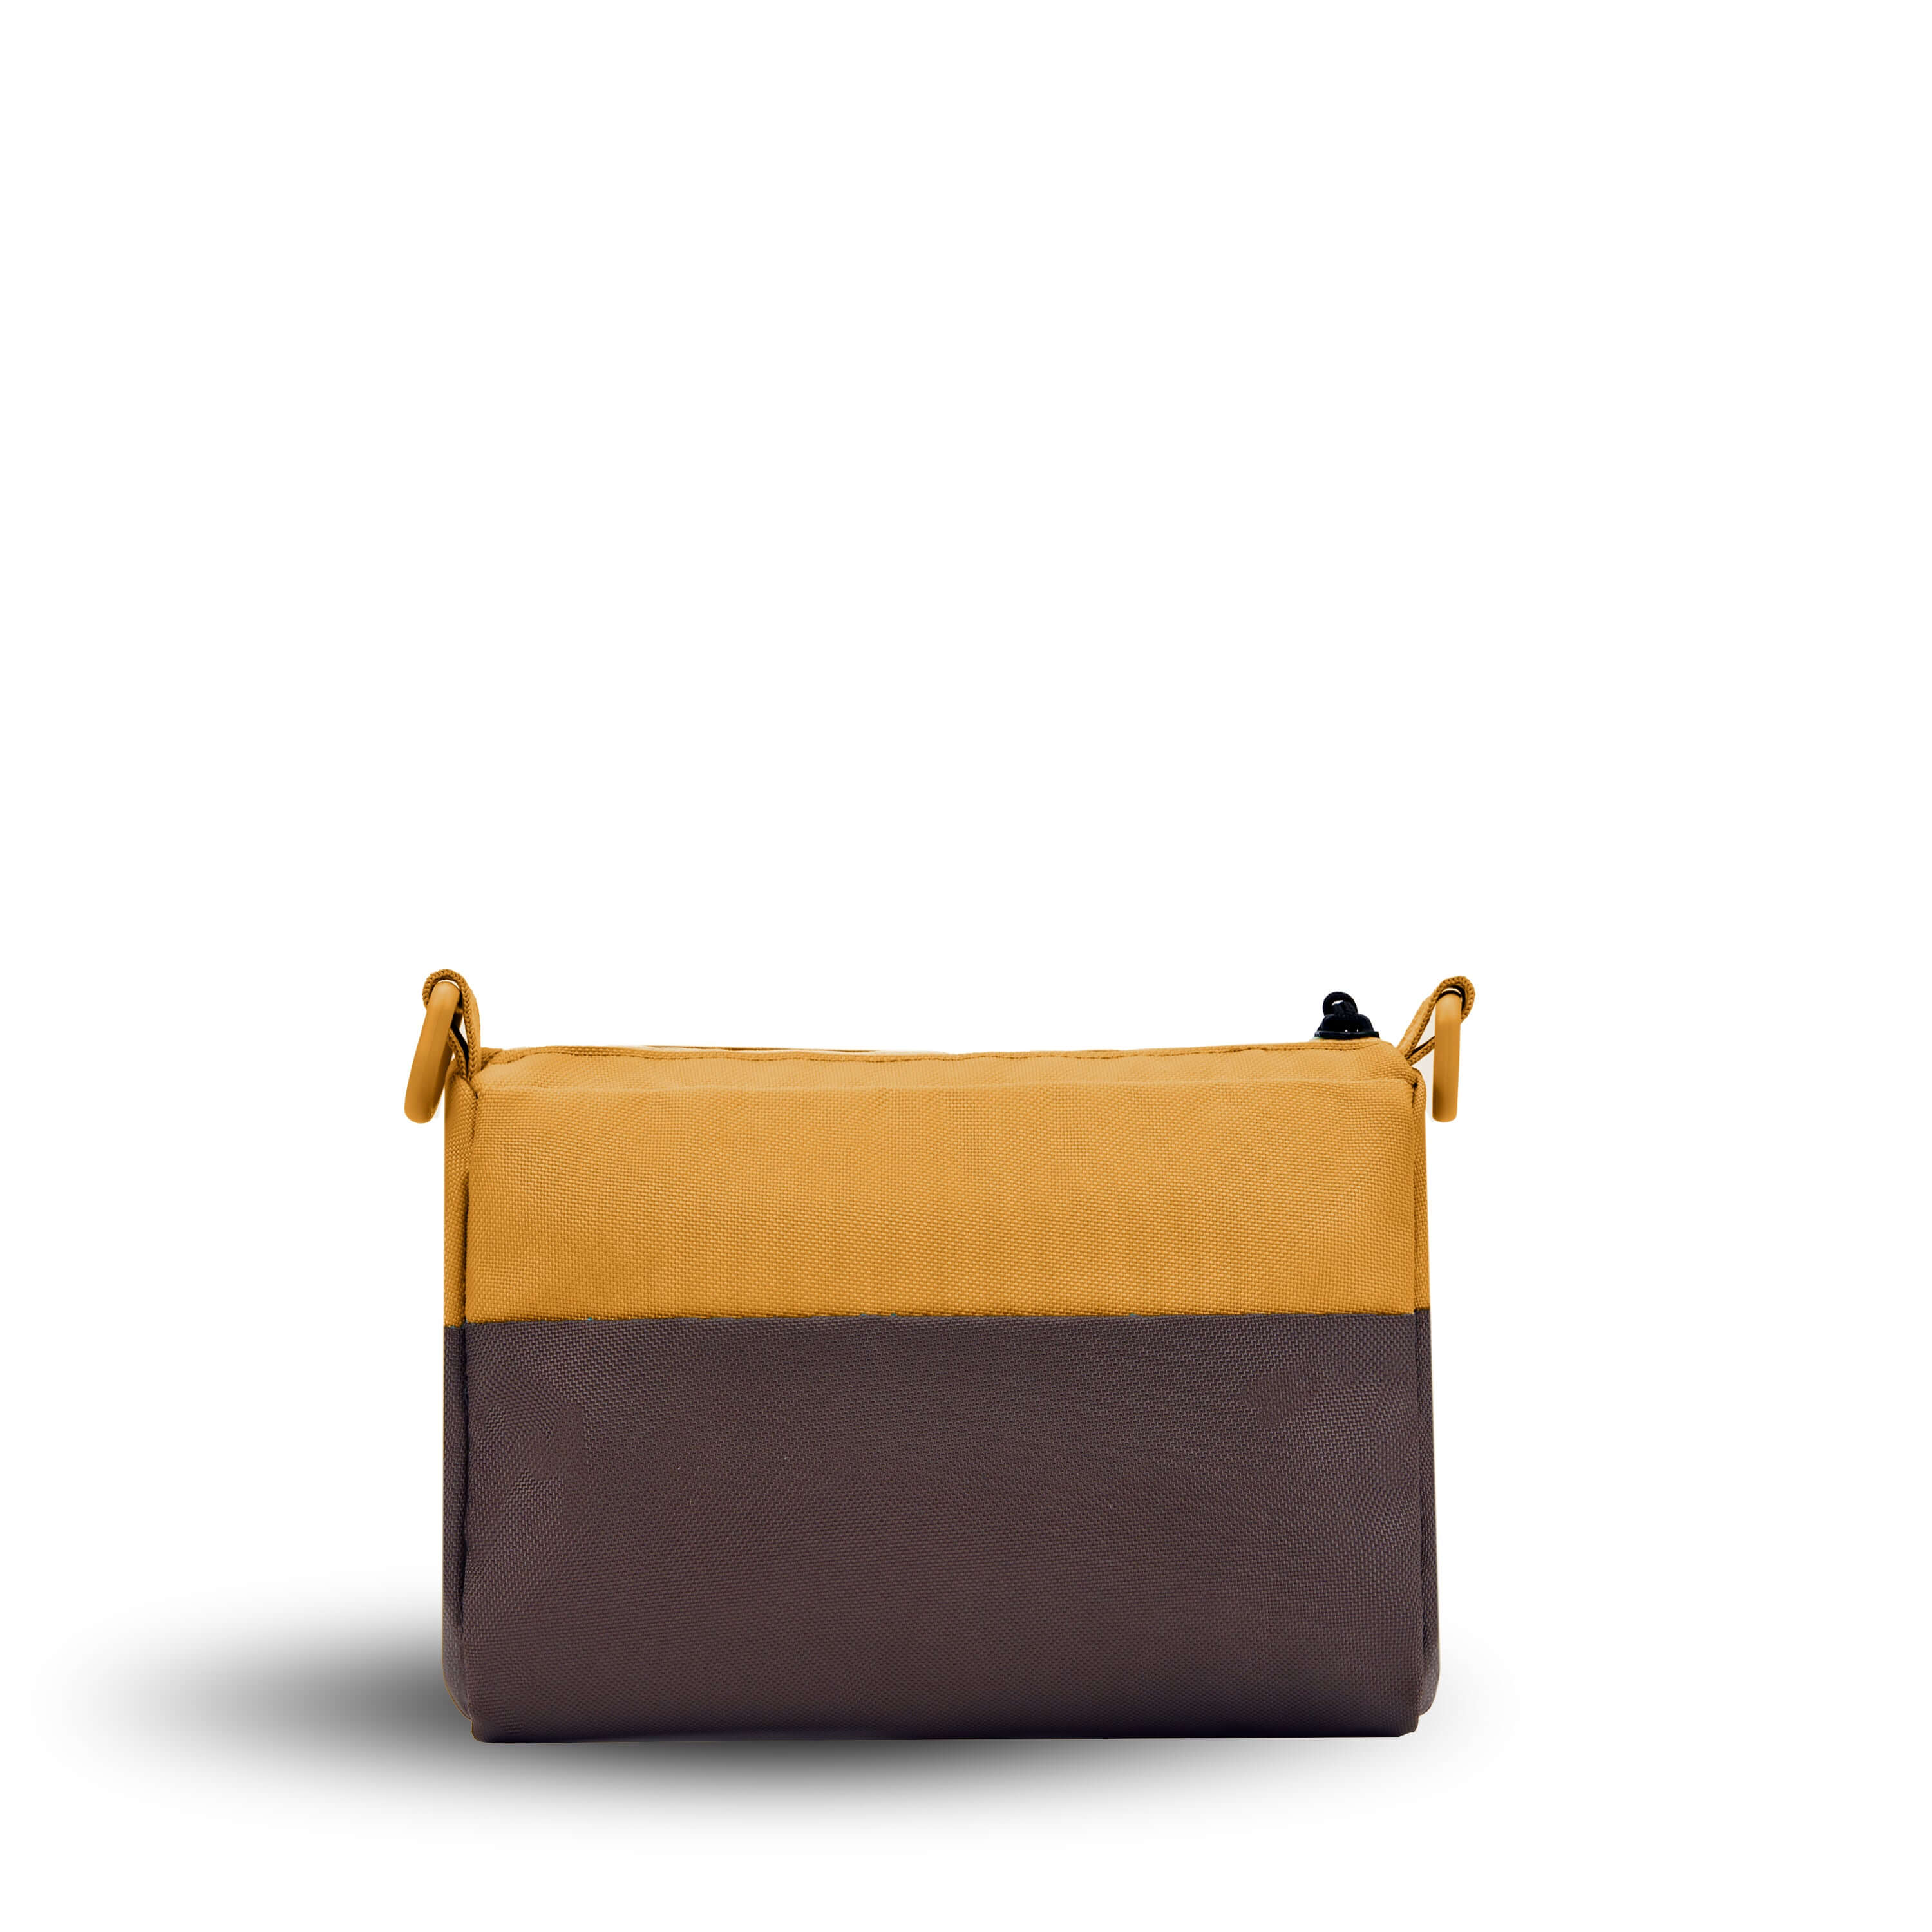 Back view of Sherpani's purse, the Skye in Sundial. It is two toned, the top half of the bag is burnt yellow and the bottom half of the bag is brown. 